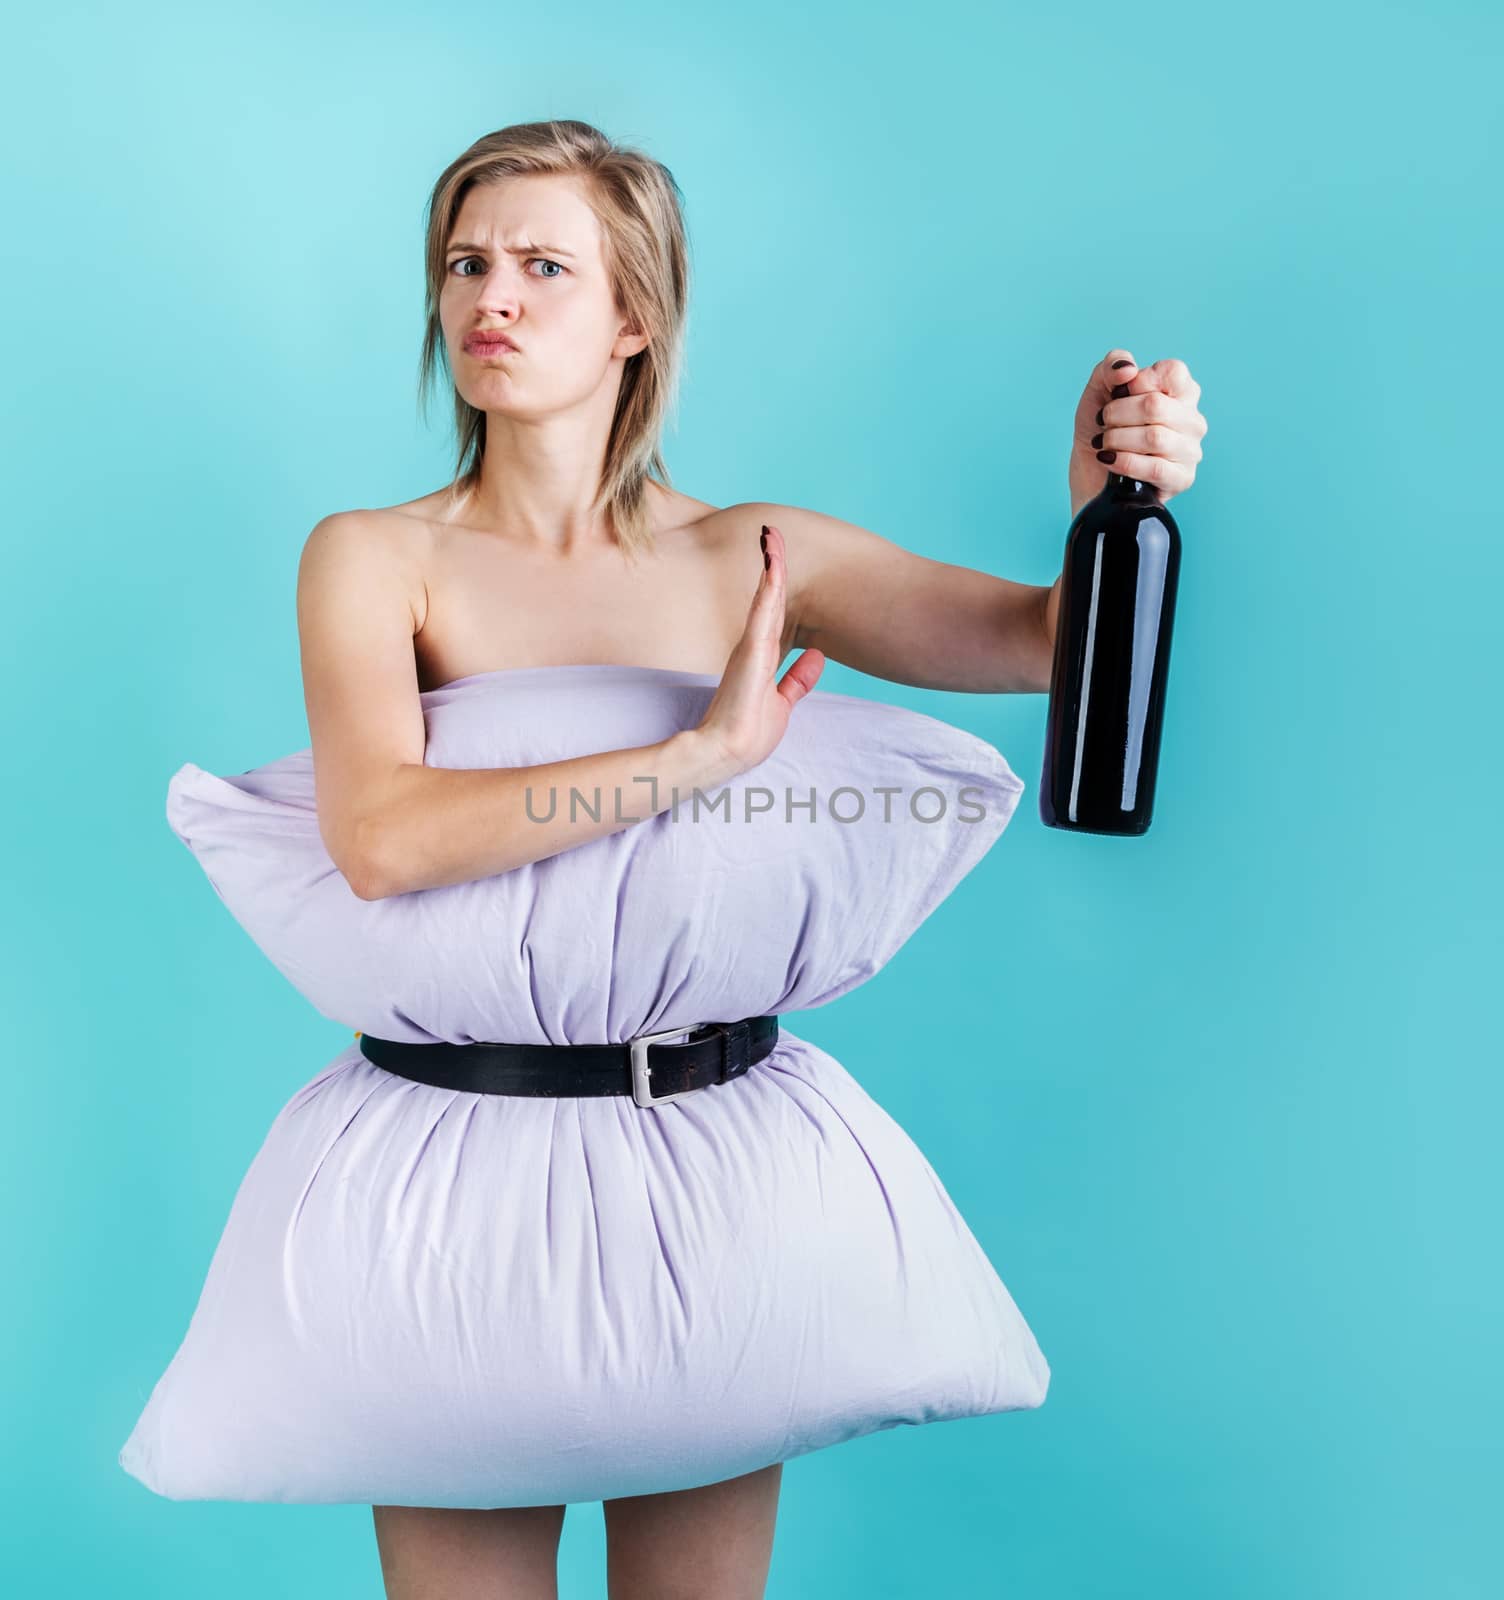 Coronavirus quarantine. Crazy quarantine. Blonde woman in pillowdress holding a wine bottle showing denying gesture isolated on blue background. Pillow challenge